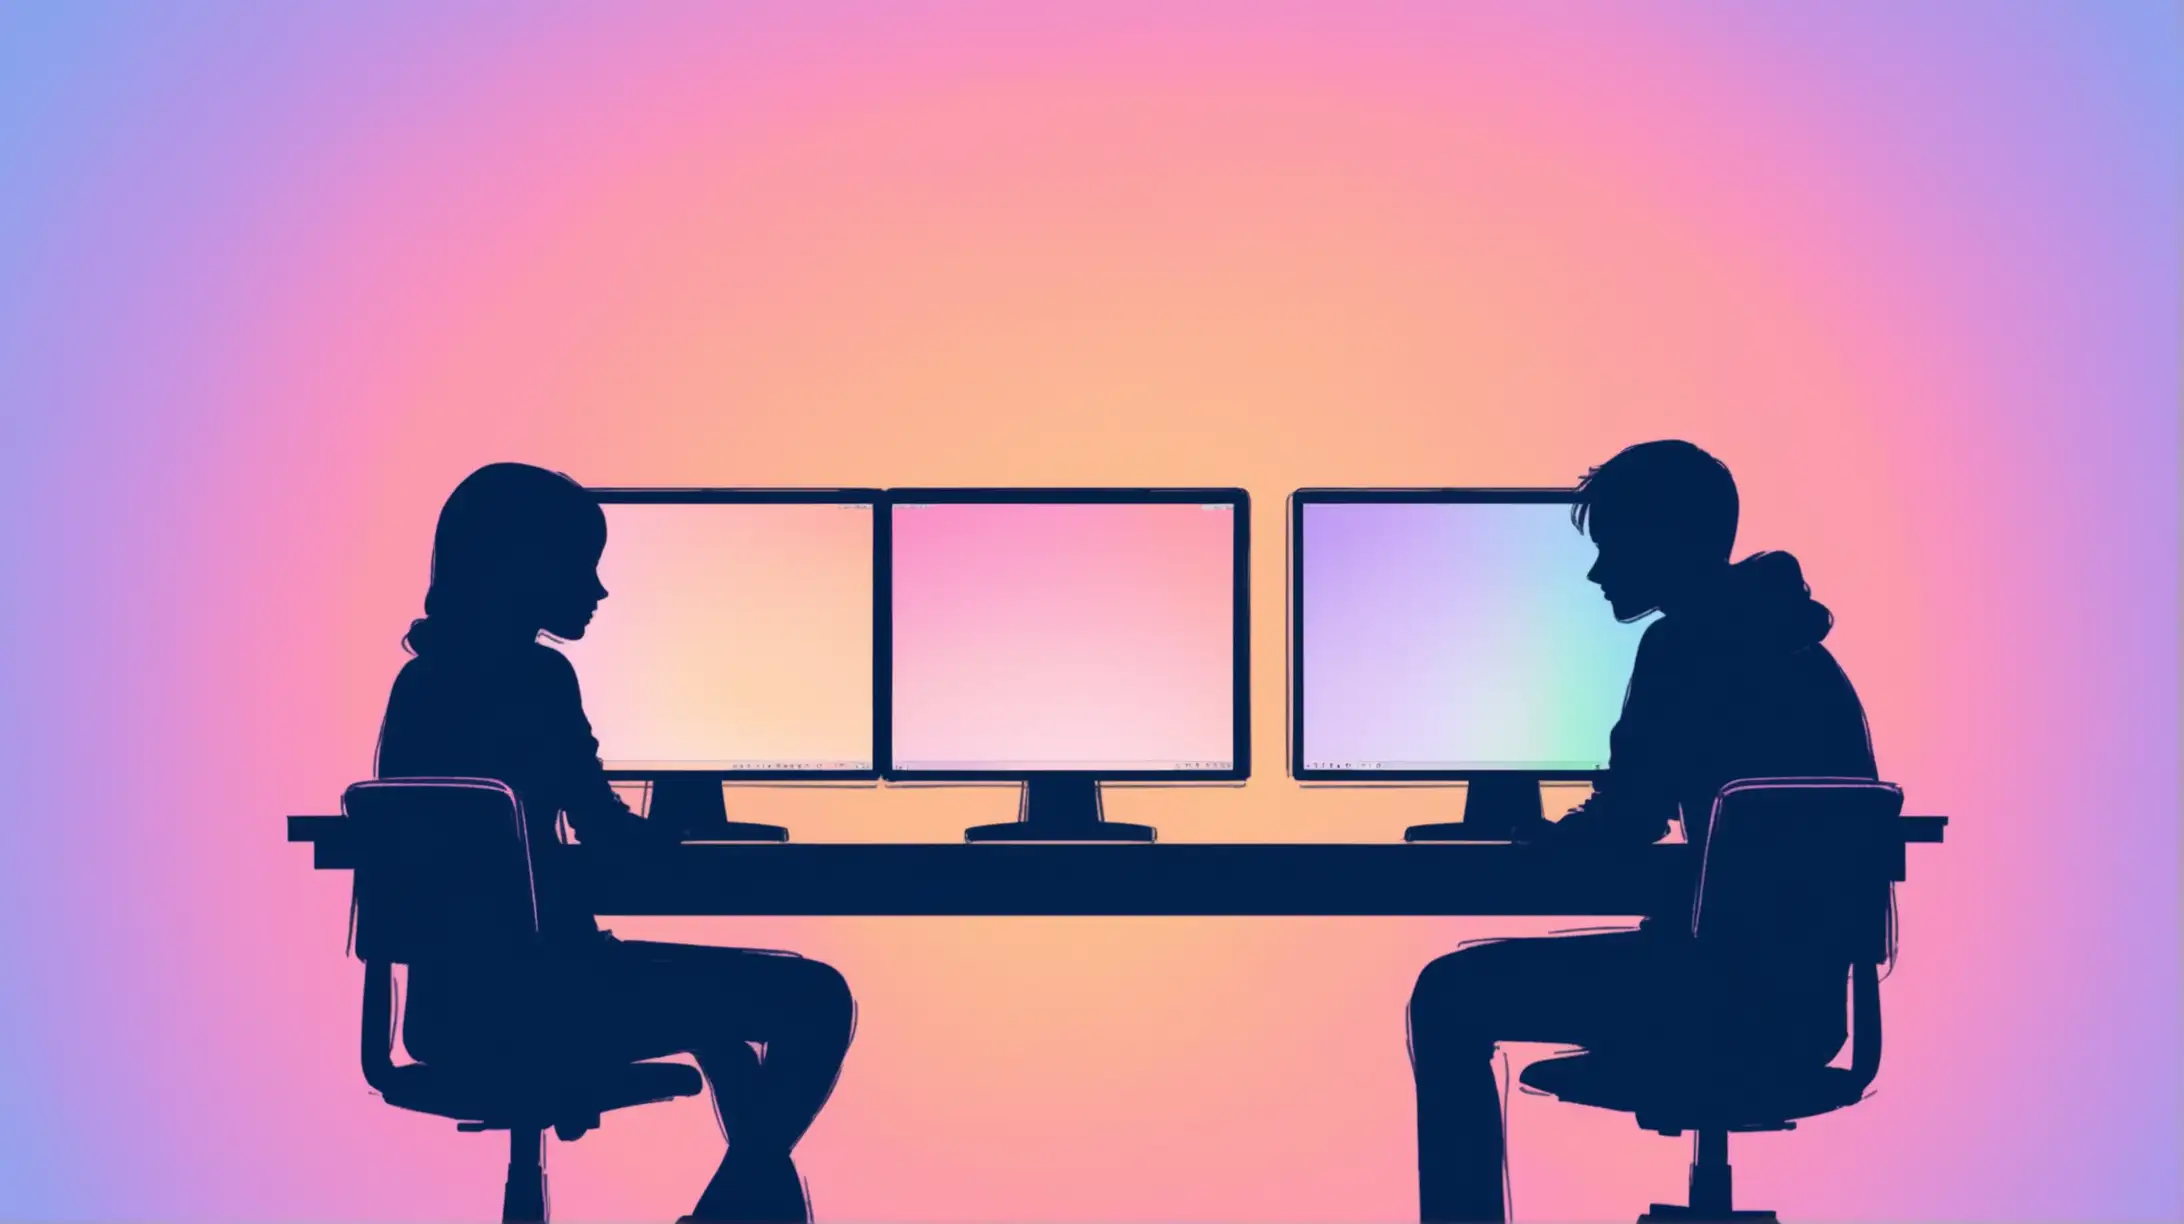 Silhouette of Two People Using Computer Desk in Pastel Colors